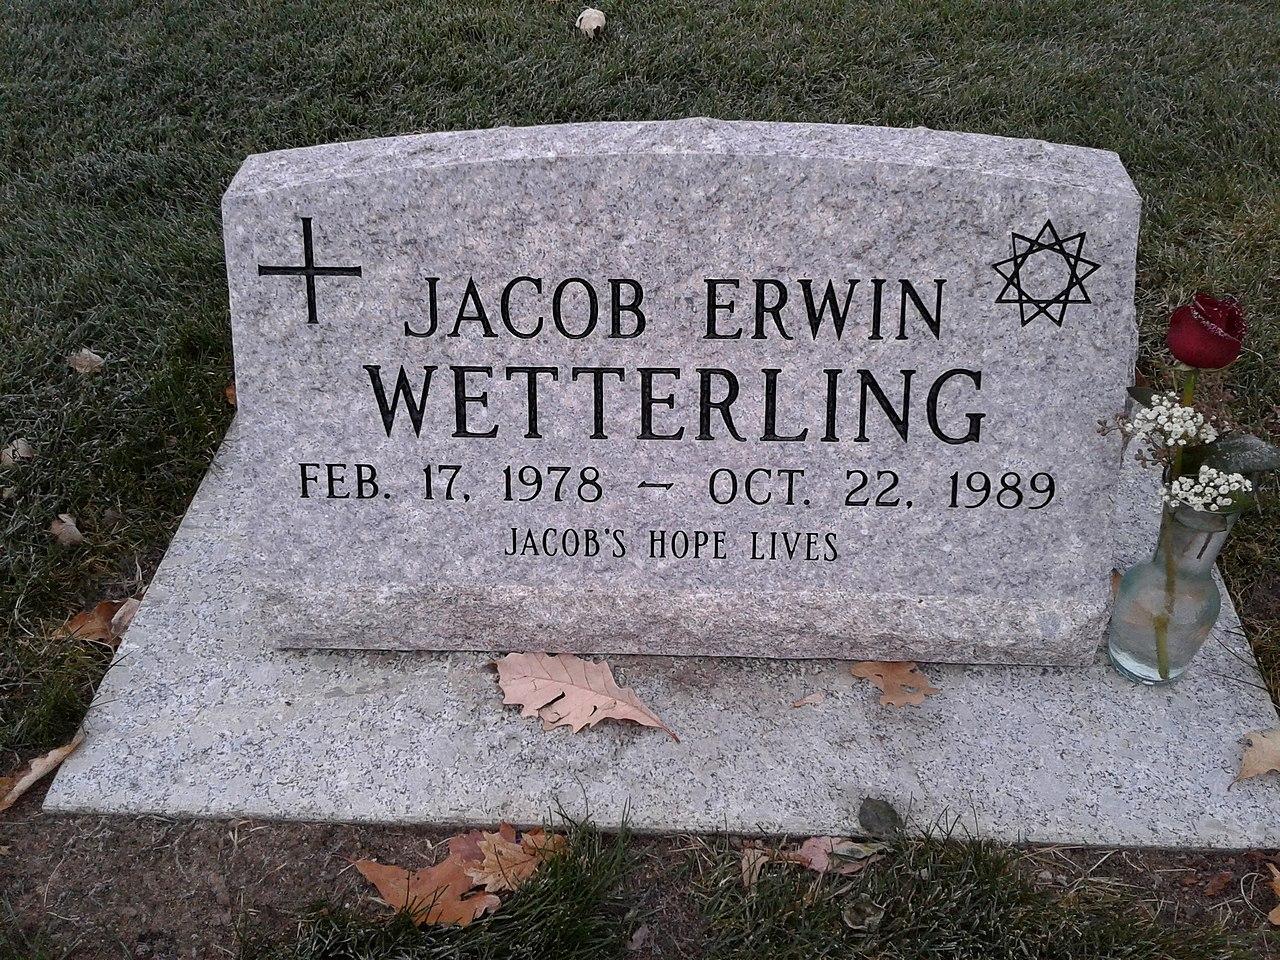 jacob wetterling find a grave - T Jacob Erwin A Wetterling Feb. 17, 1978 Oct. 22, 1989 Jacob'S Hope Lives